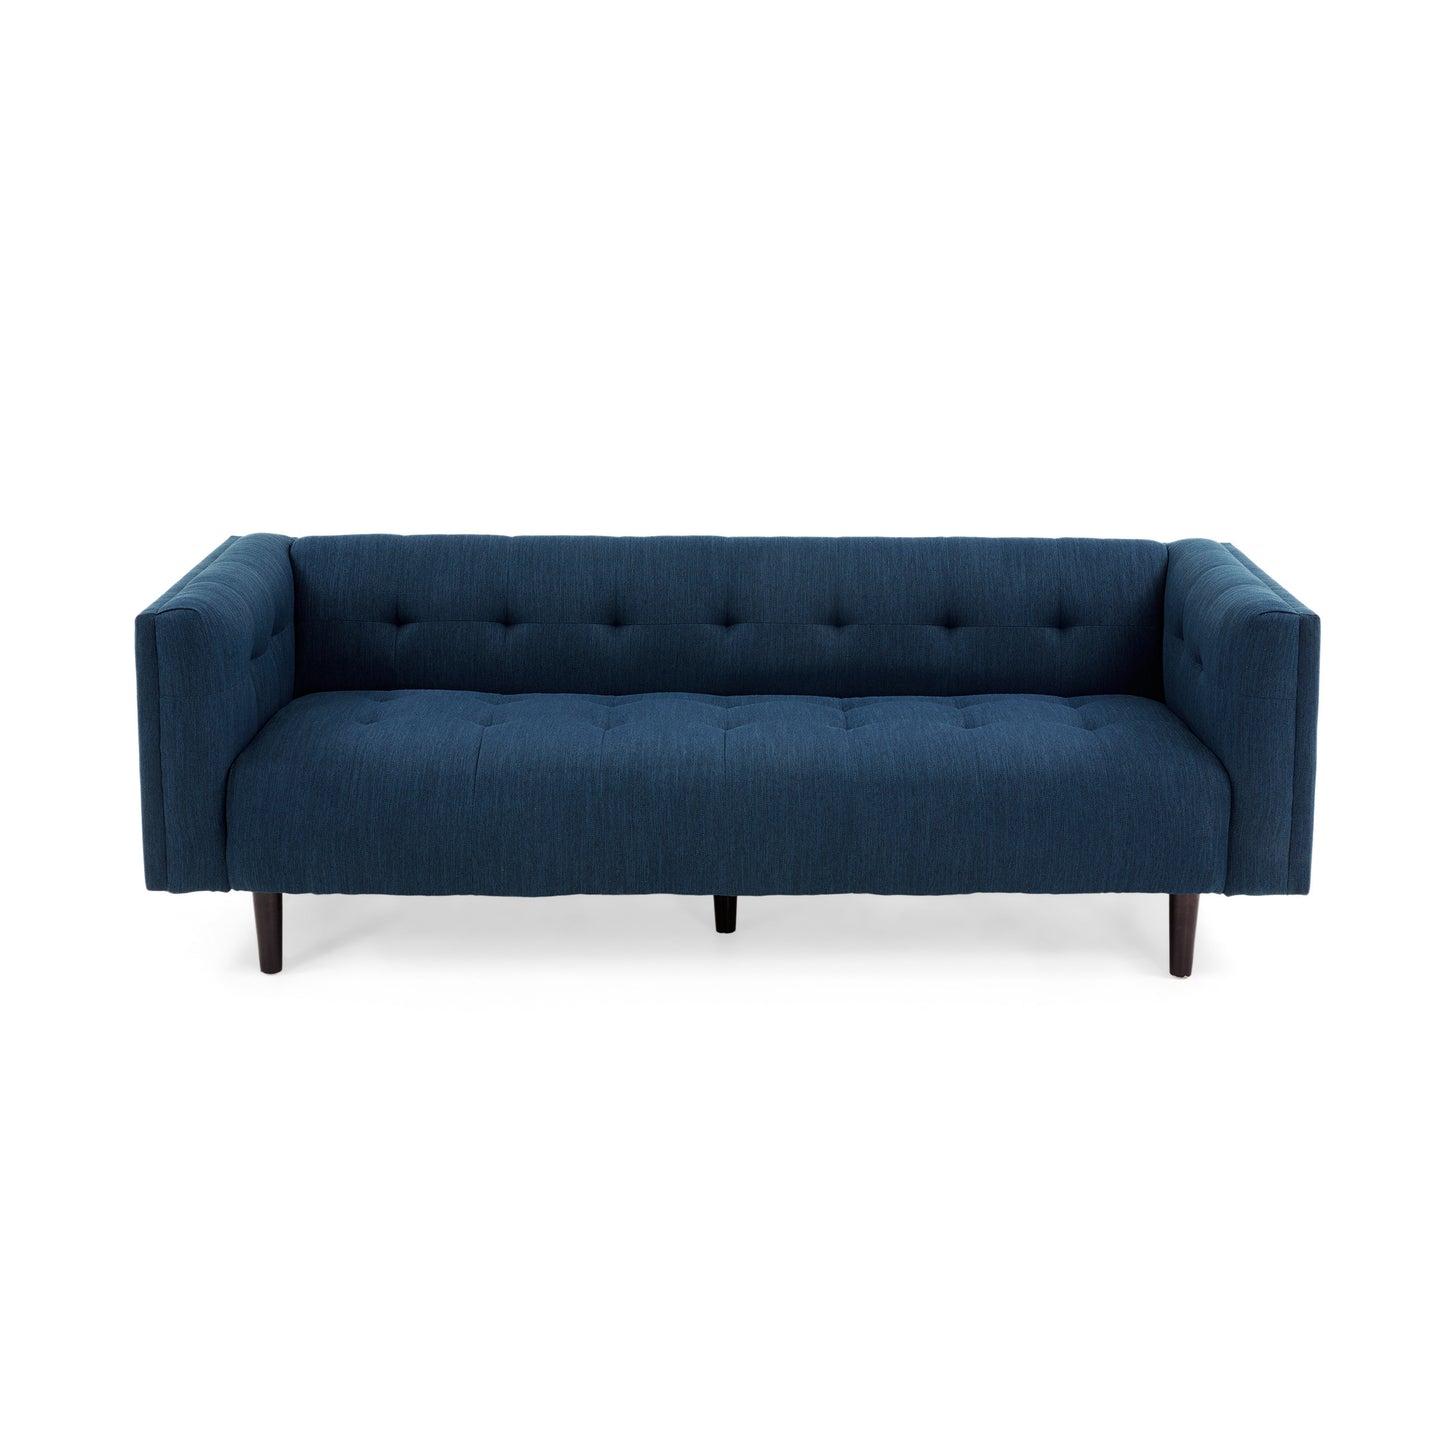 Kennedii Mid-Century Modern Fabric Upholstered Tufted 3 Seater Sofa